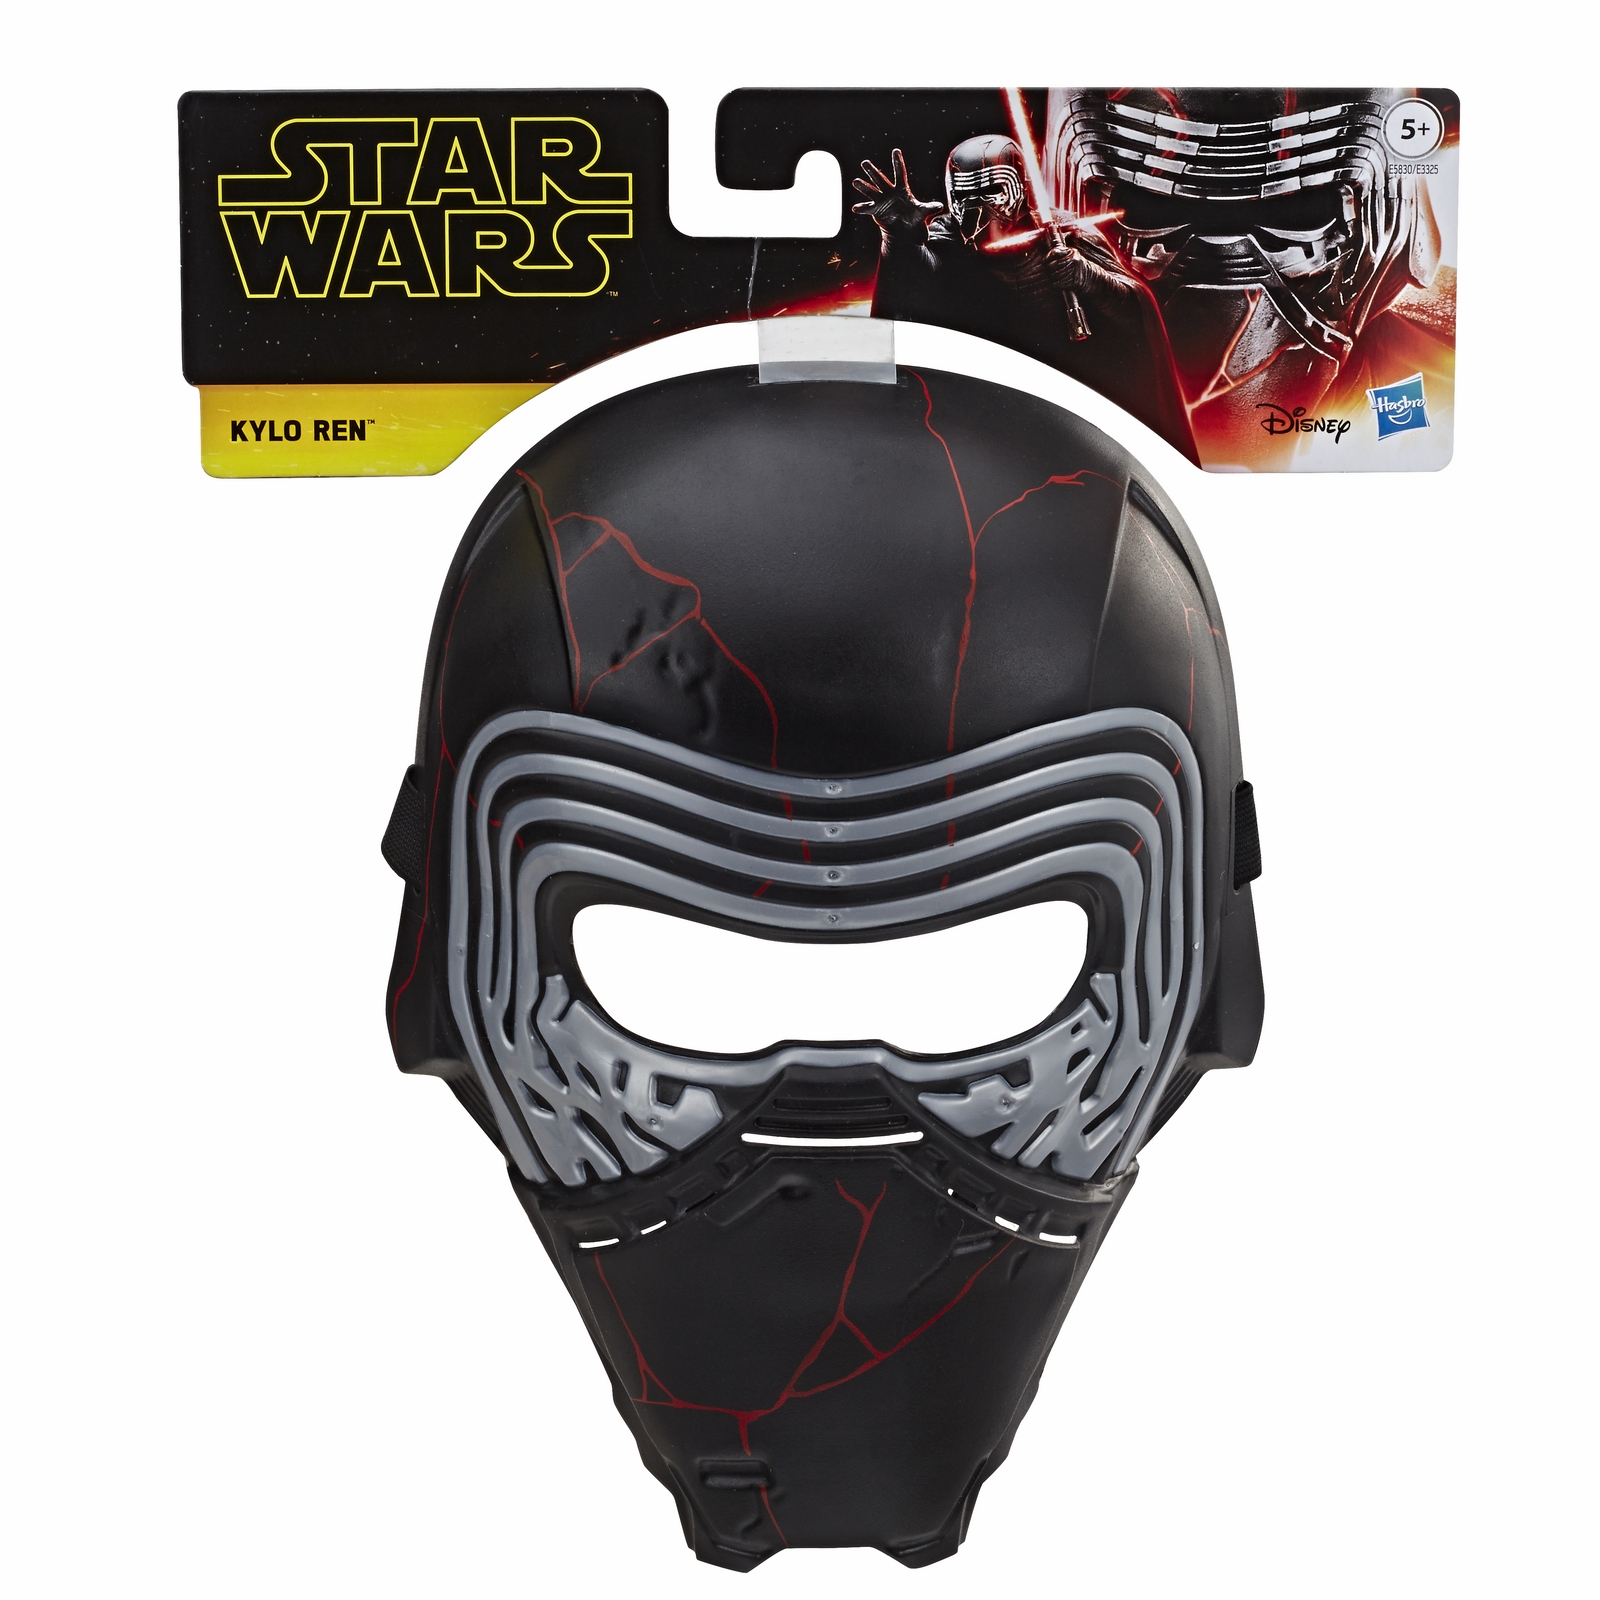 STAR WARS ROLE-PLAY MASK Assortment - in pck (Kylo Ren).jpg